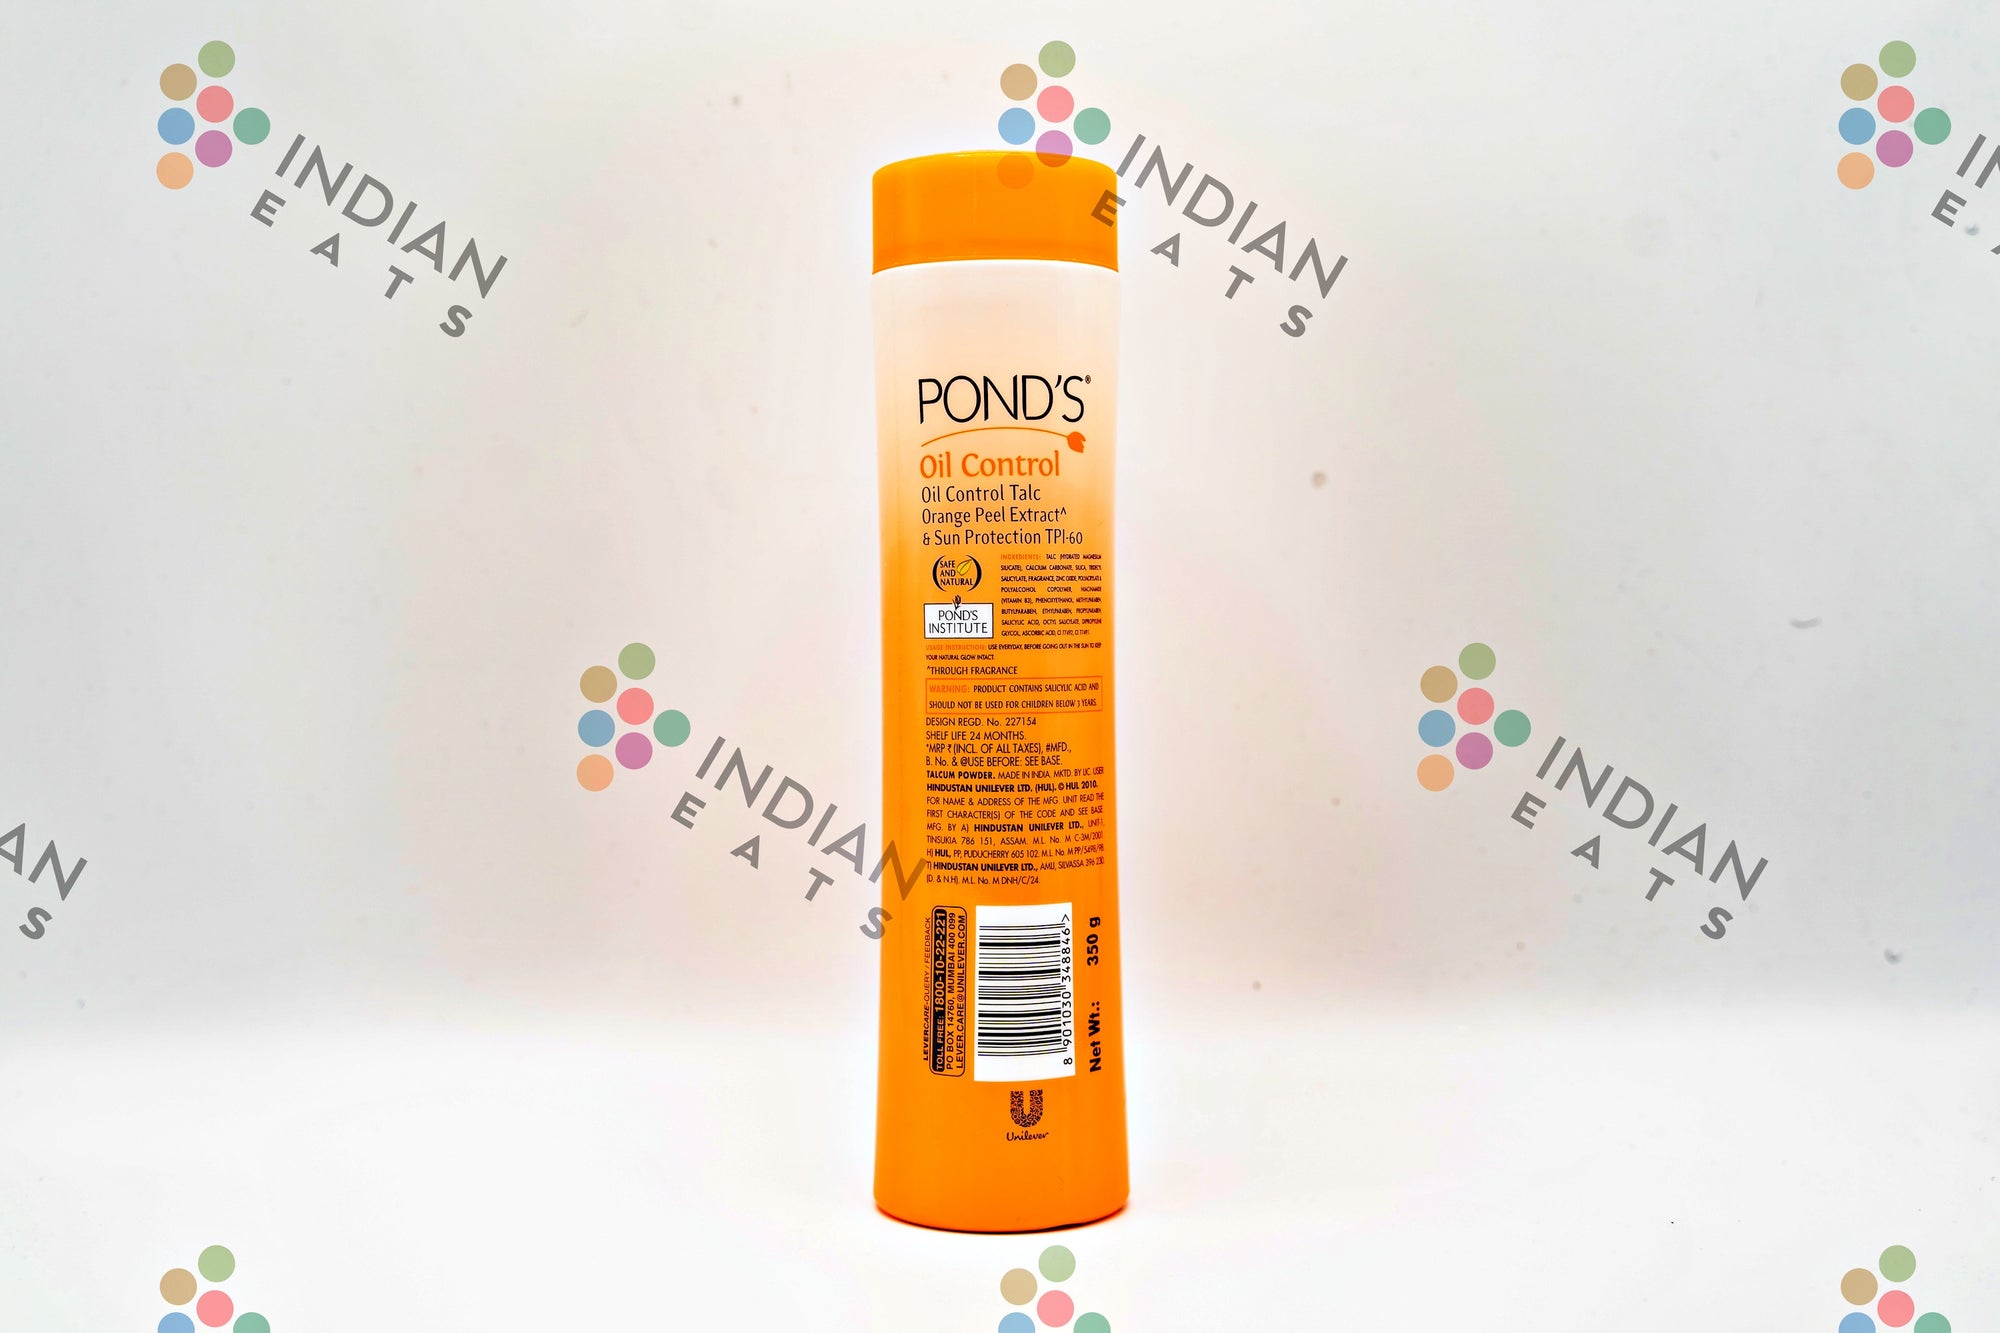 POND's Sandal Radiance Talcum Powder Natural Sunscreen - Price in India,  Buy POND's Sandal Radiance Talcum Powder Natural Sunscreen Online In India,  Reviews, Ratings & Features | Flipkart.com